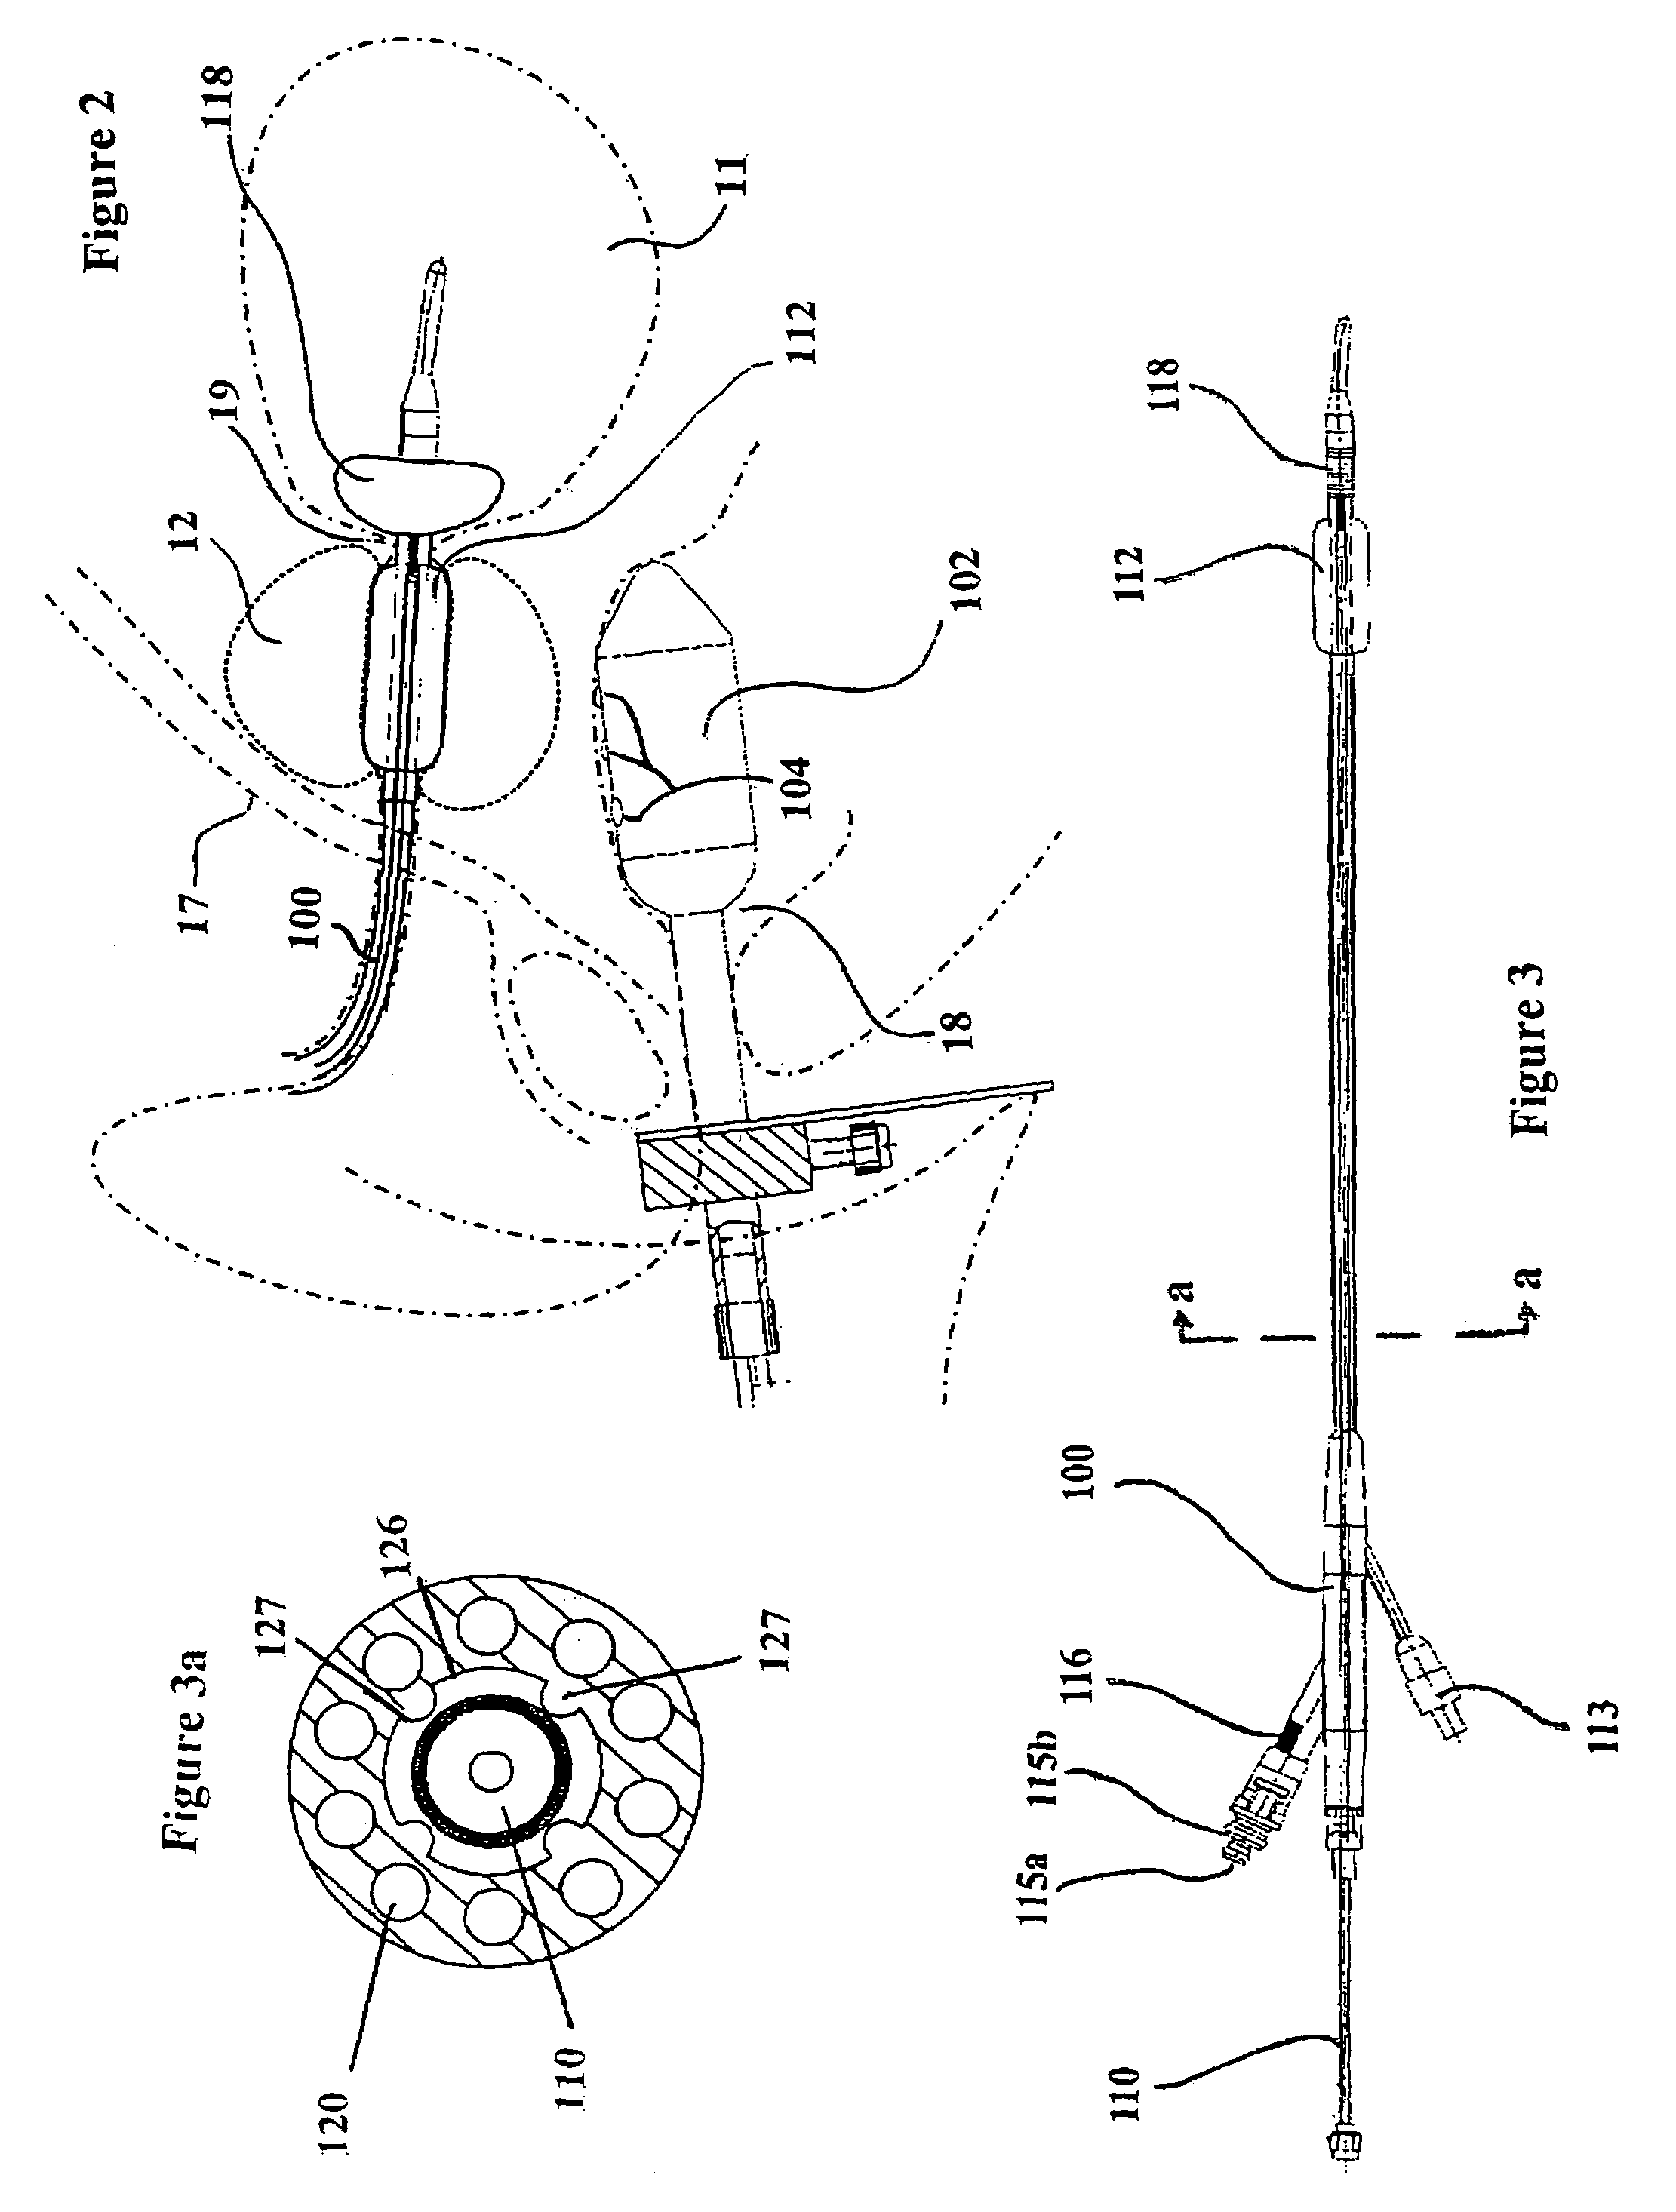 Device for treatment of tissue adjacent a bodily conduit by thermocompression